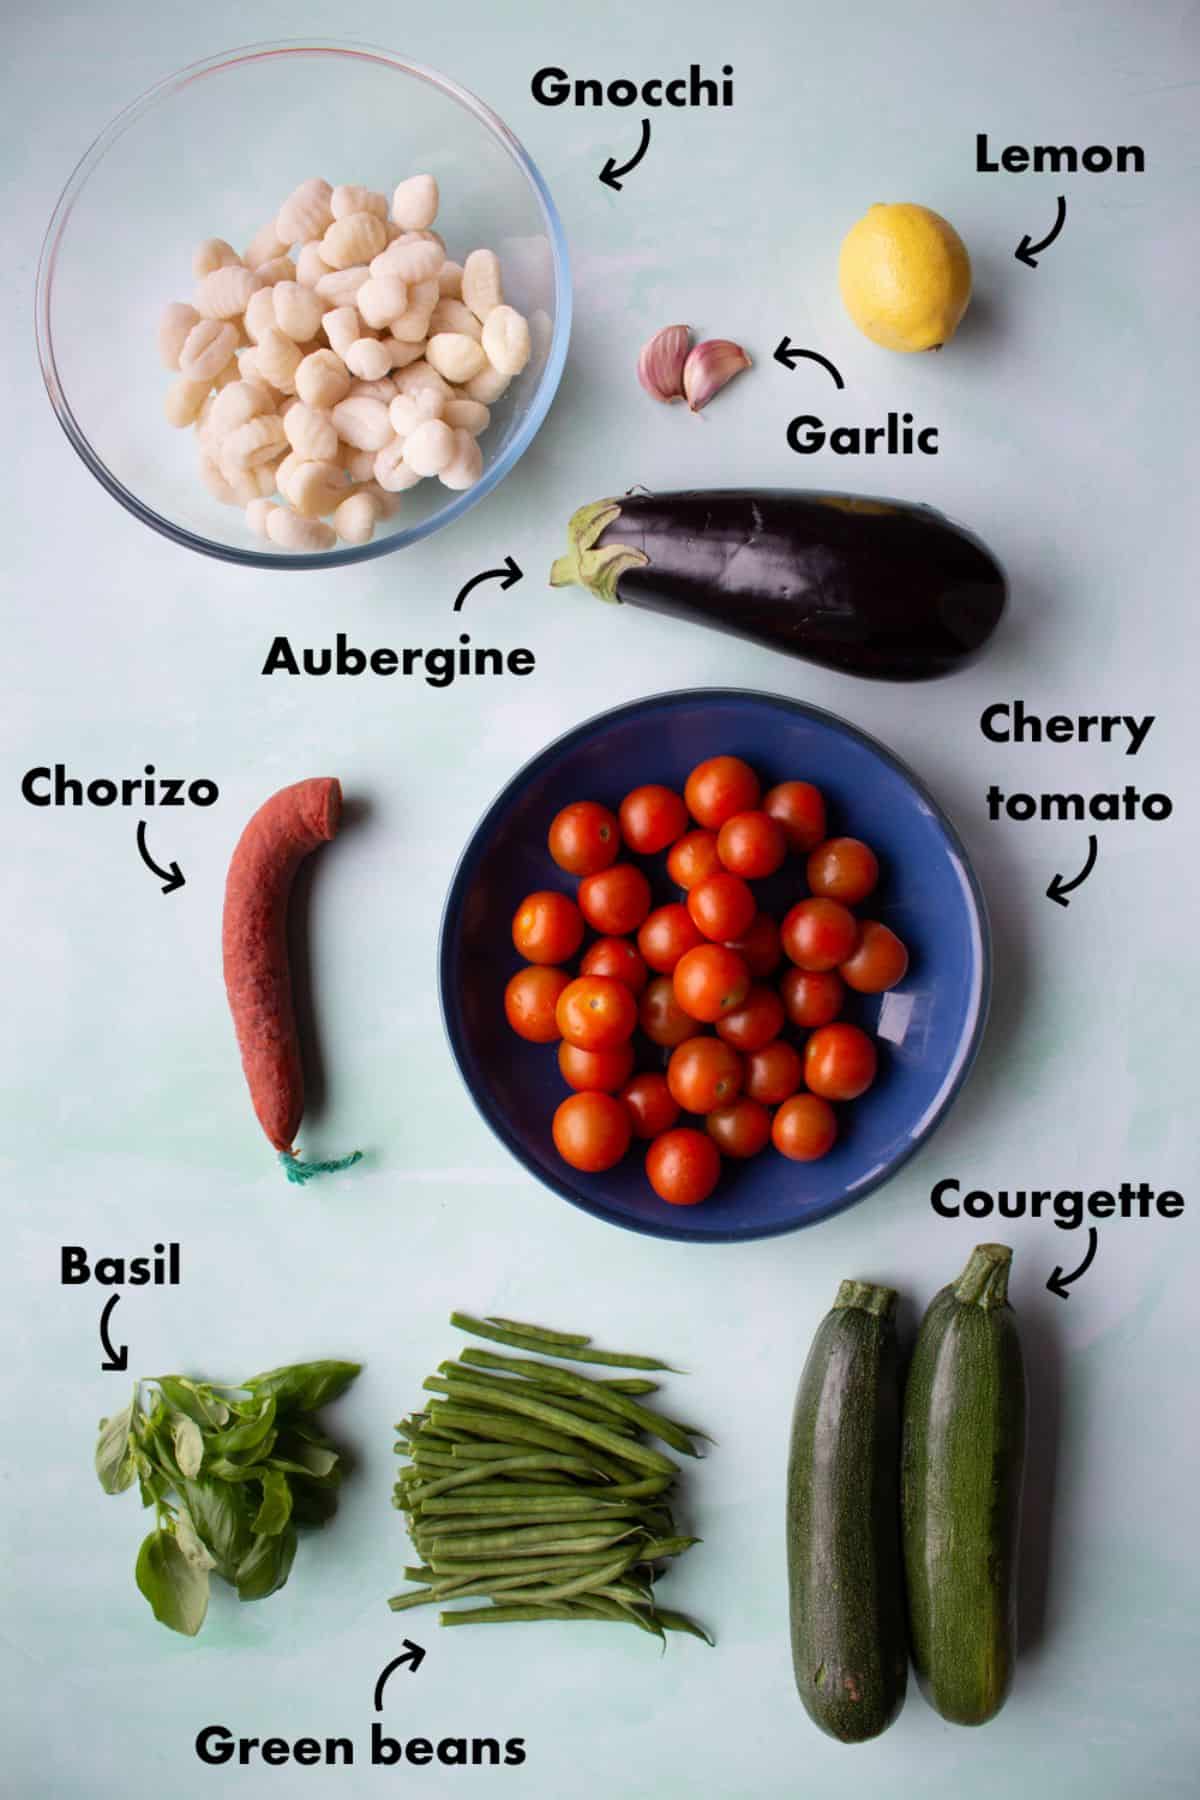 Ingredients to make the gnocchi with roasted vegetables laid out on a pale blue background and labelled.